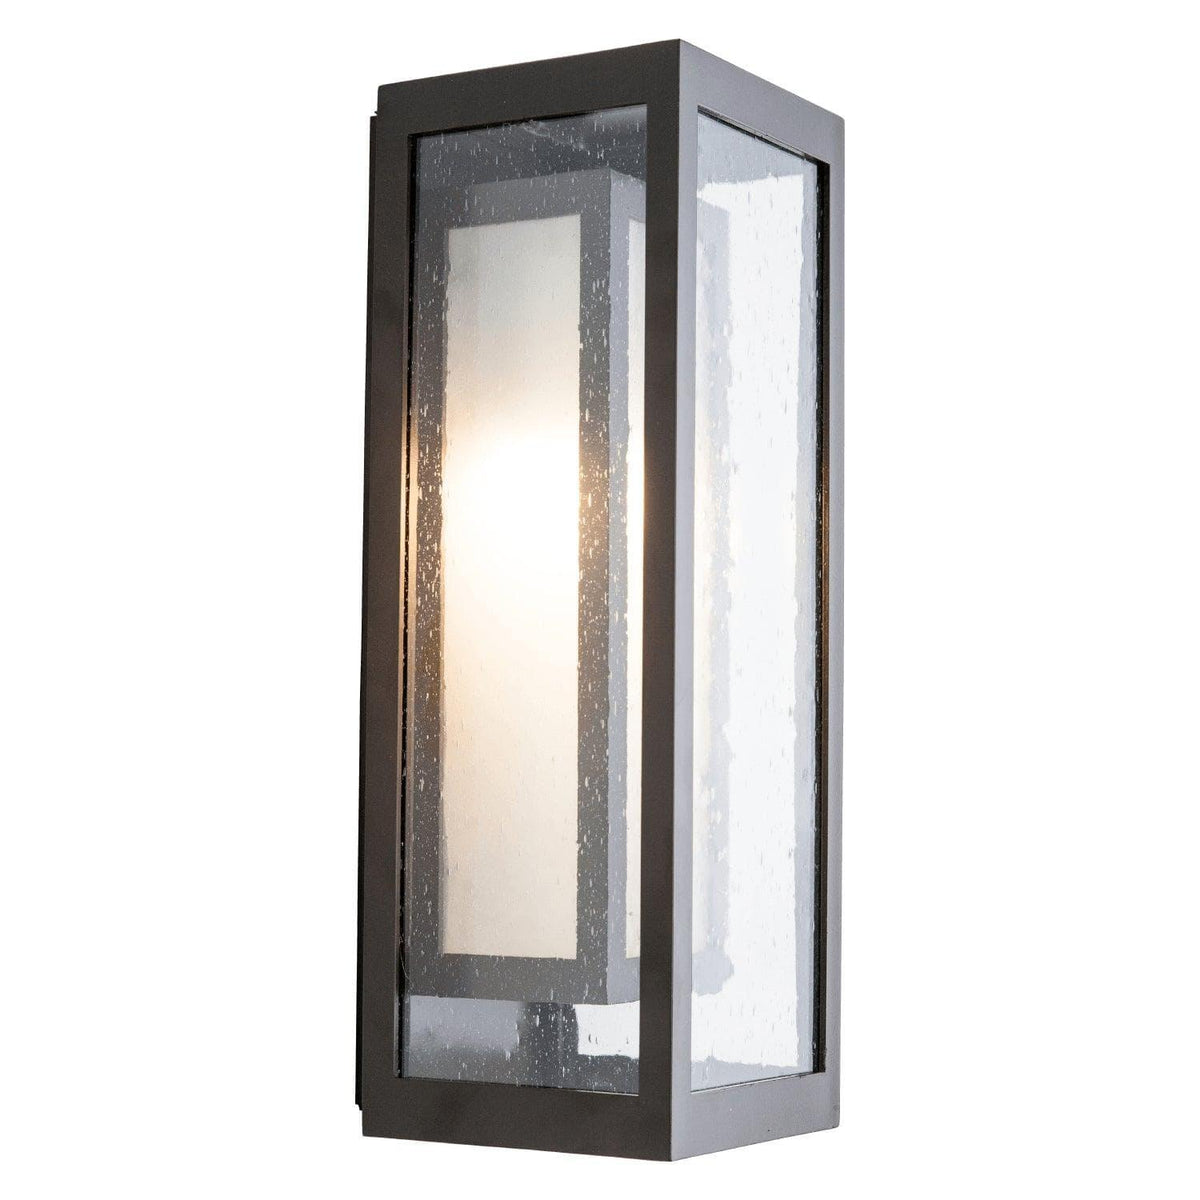 Hammerton Studio - Outdoor Double Box Cover Sconce with Glass - ODB0027-18-SB-F-L2 | Montreal Lighting & Hardware